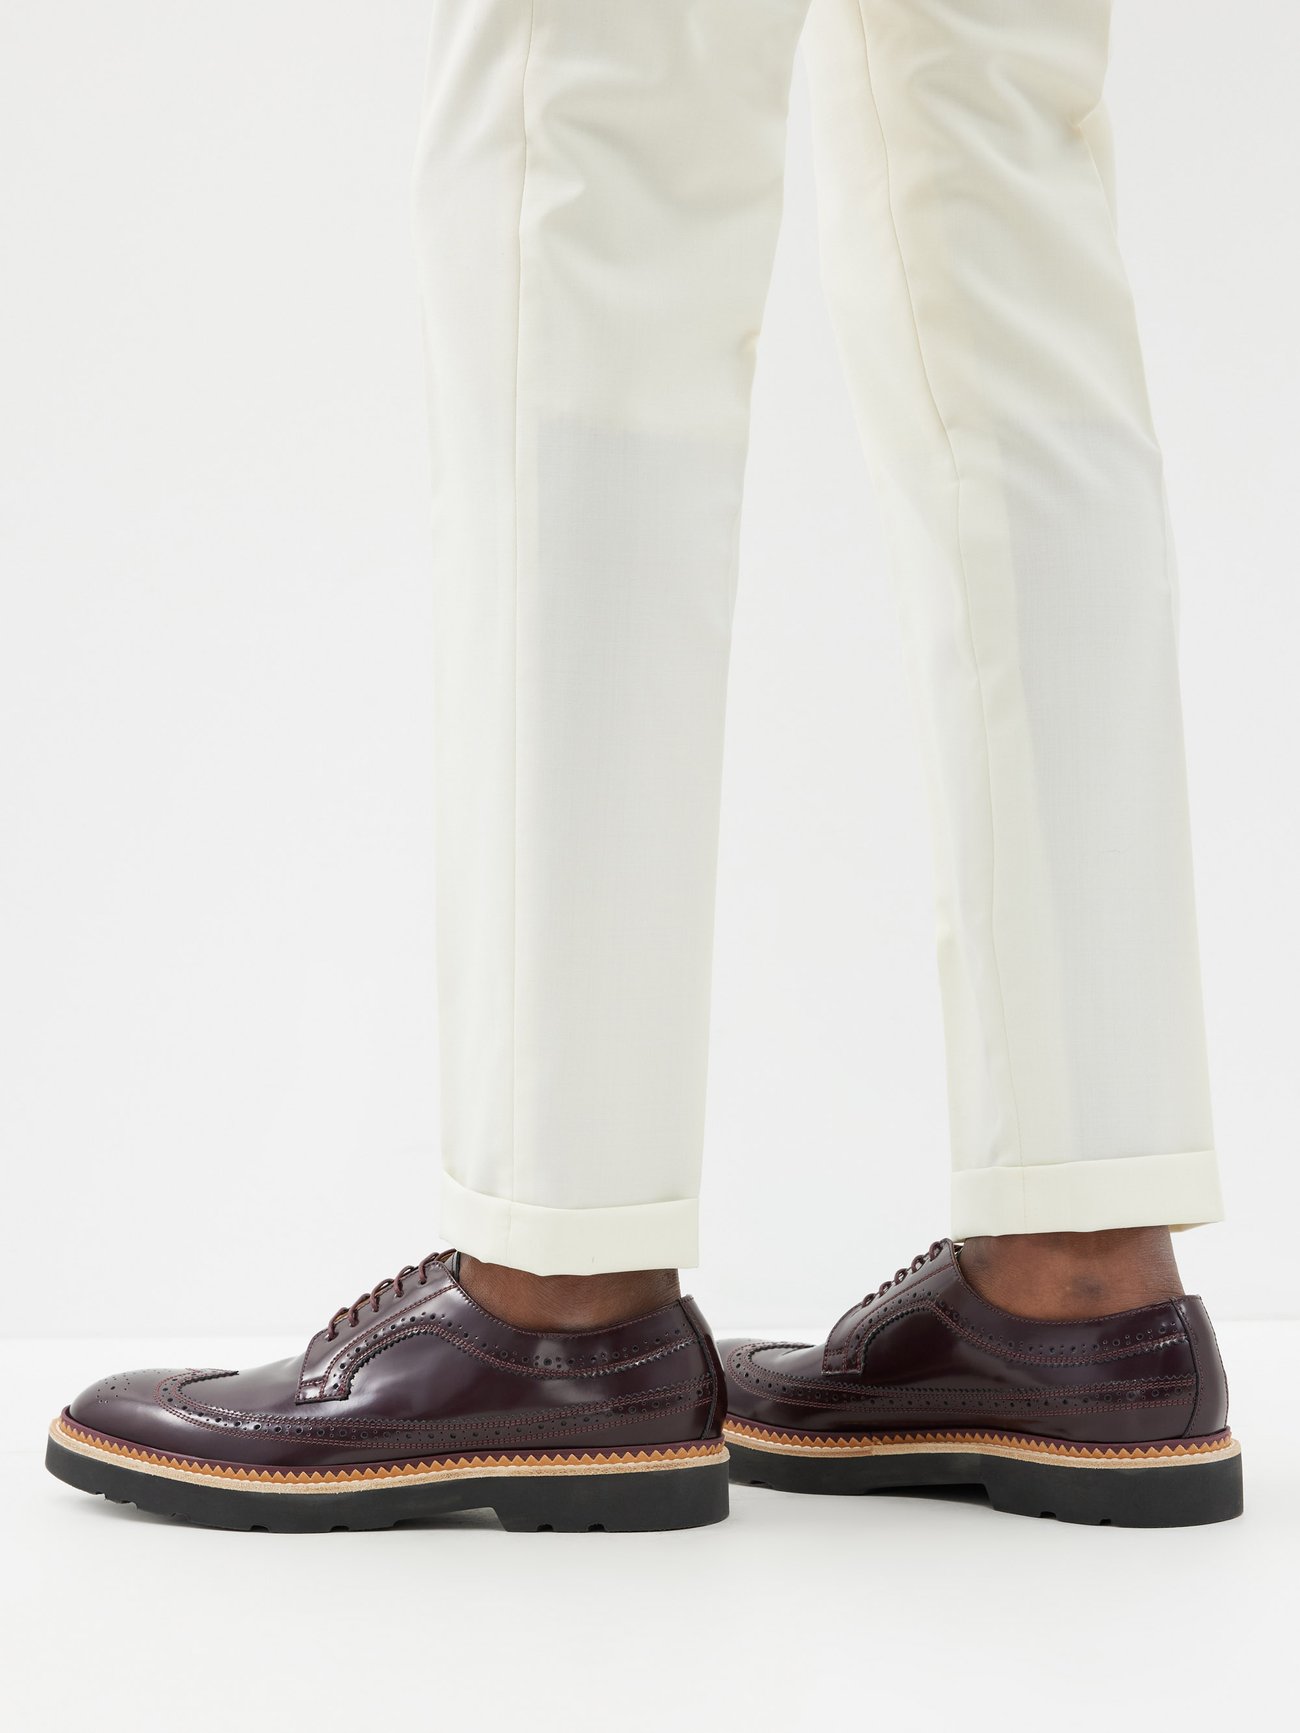 Count leather brogues